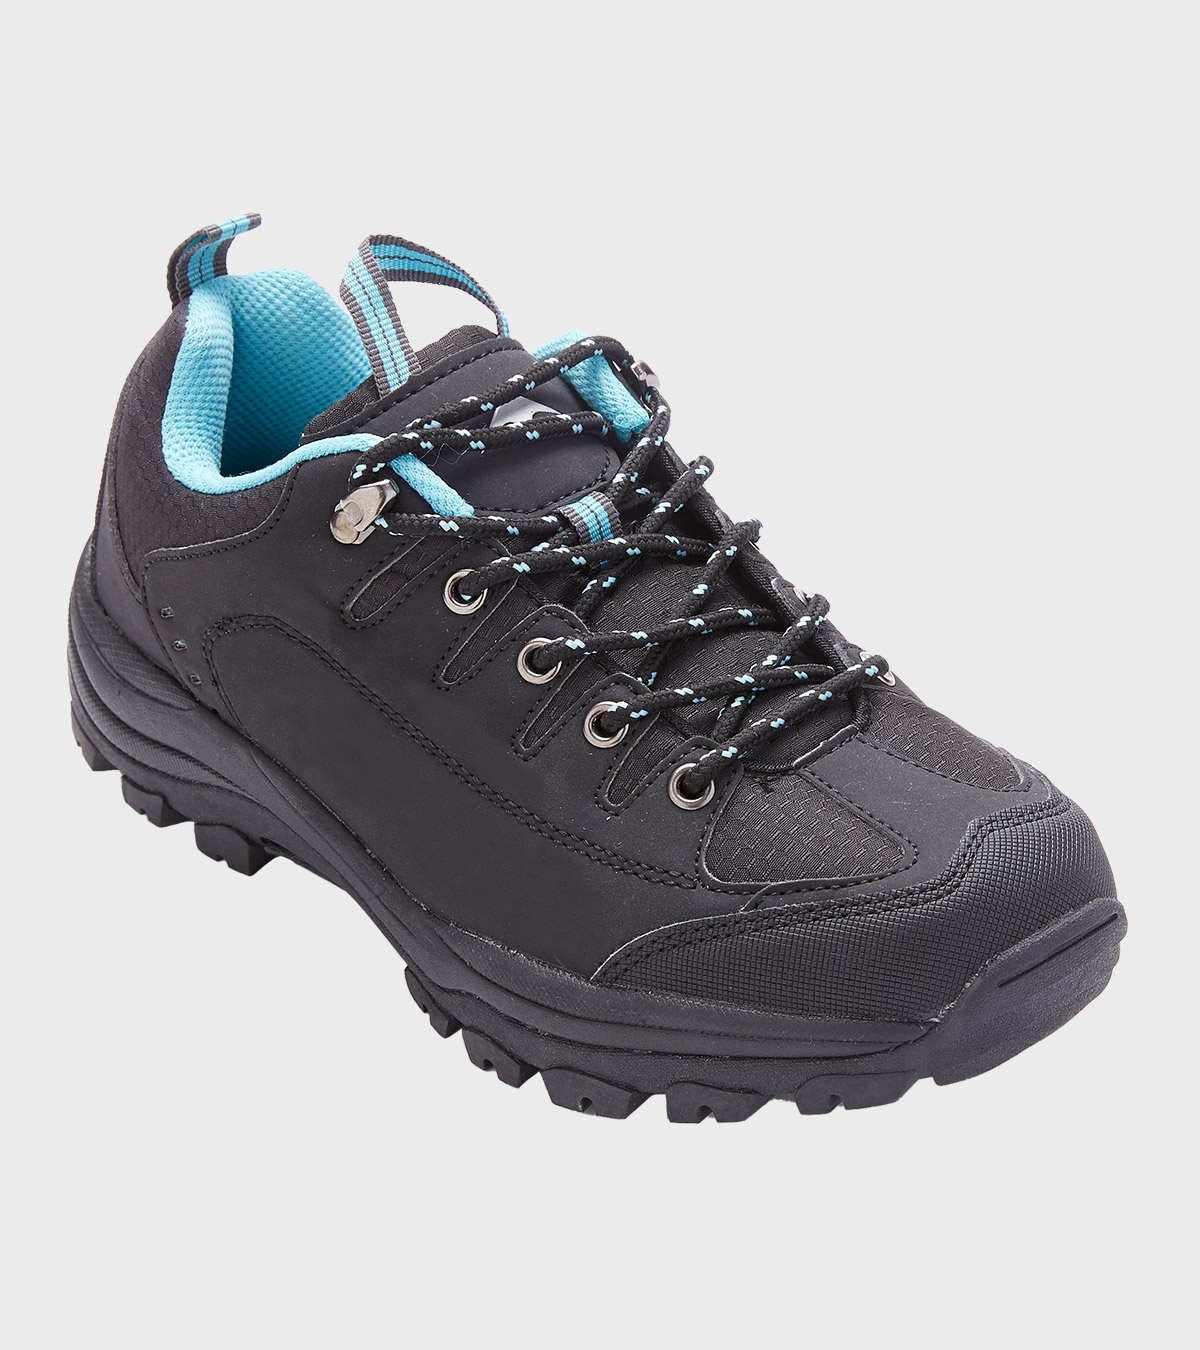 https://d368r8jqz0fwvm.cloudfront.net/26077-product_lg/zapatillas-outdoor-de-mujer-dome.jpg